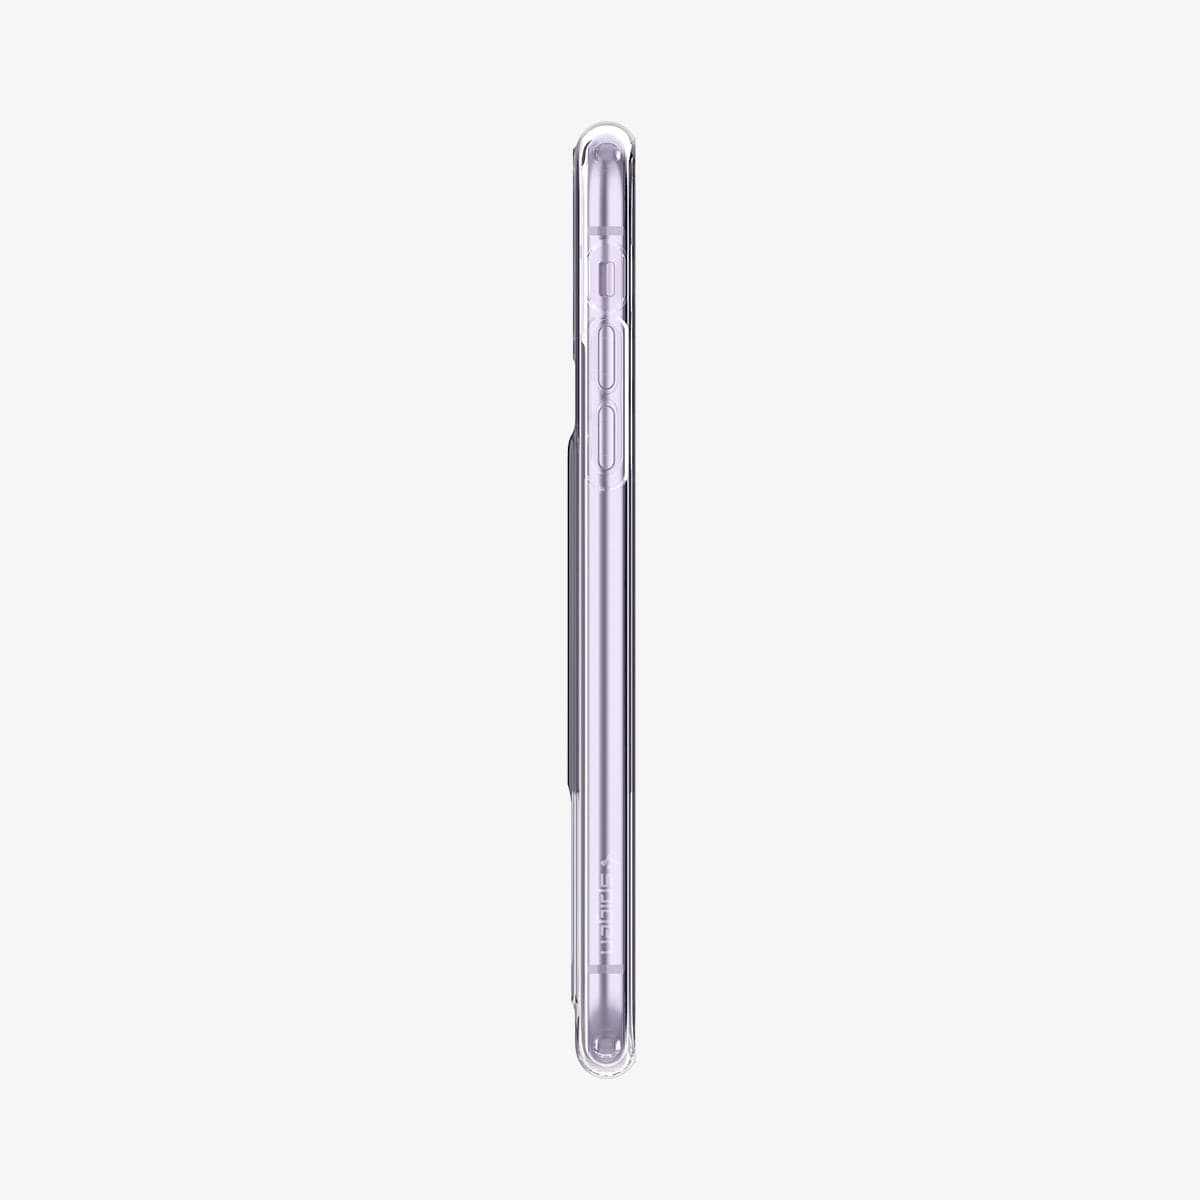 ACS02936 - iPhone 11 Case Crystal Slot in crystal clear showing the side with volume controls